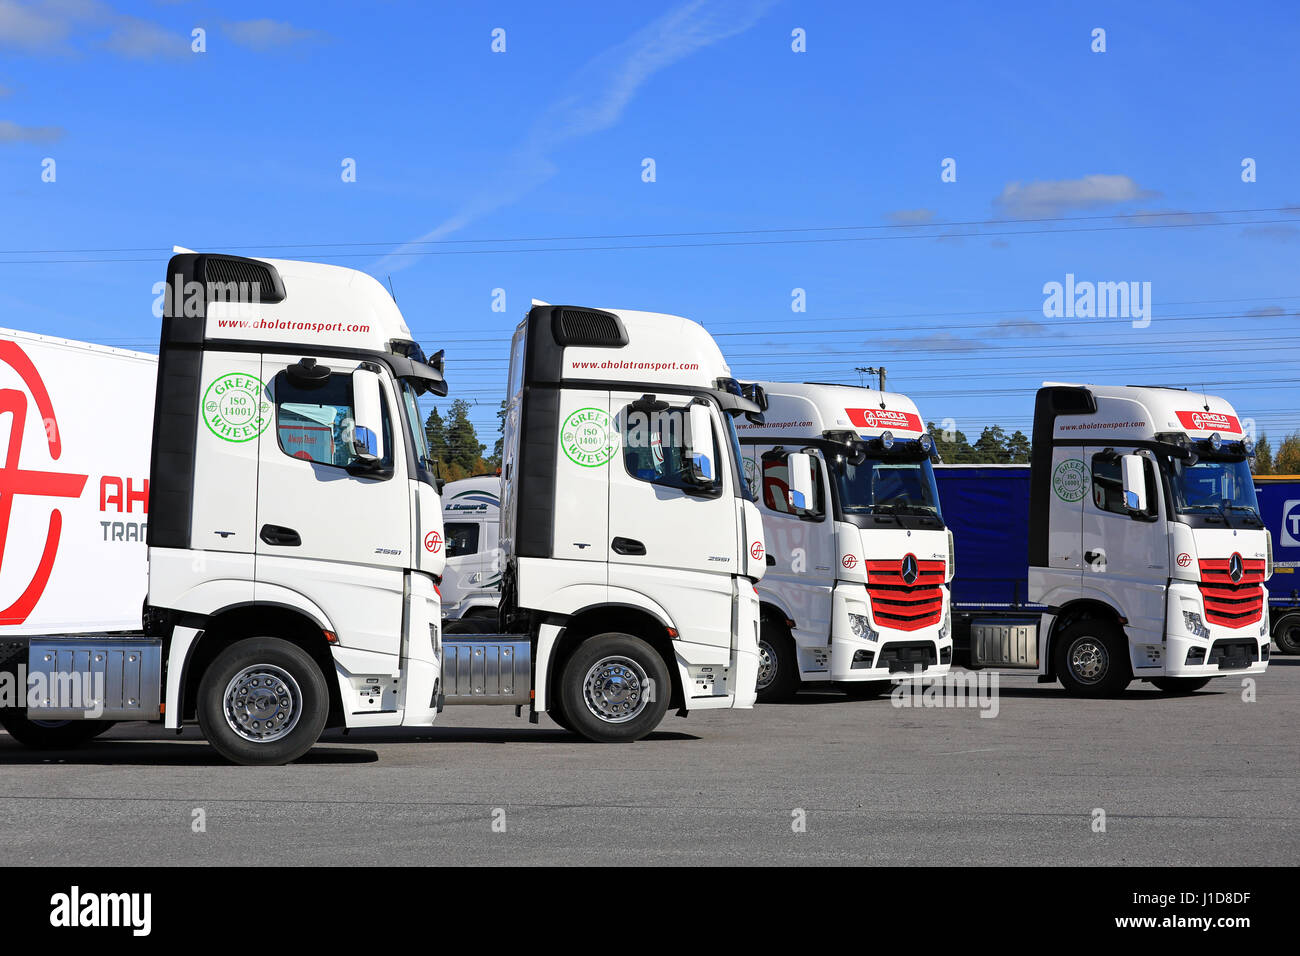 NAANTALI, FINLAND - SEPTEMBER 16; 2016: Fleet of new Mercedes-Benz Actros cargo trucks on display against blue sky on the Open Doors Event of Ahola Tr Stock Photo